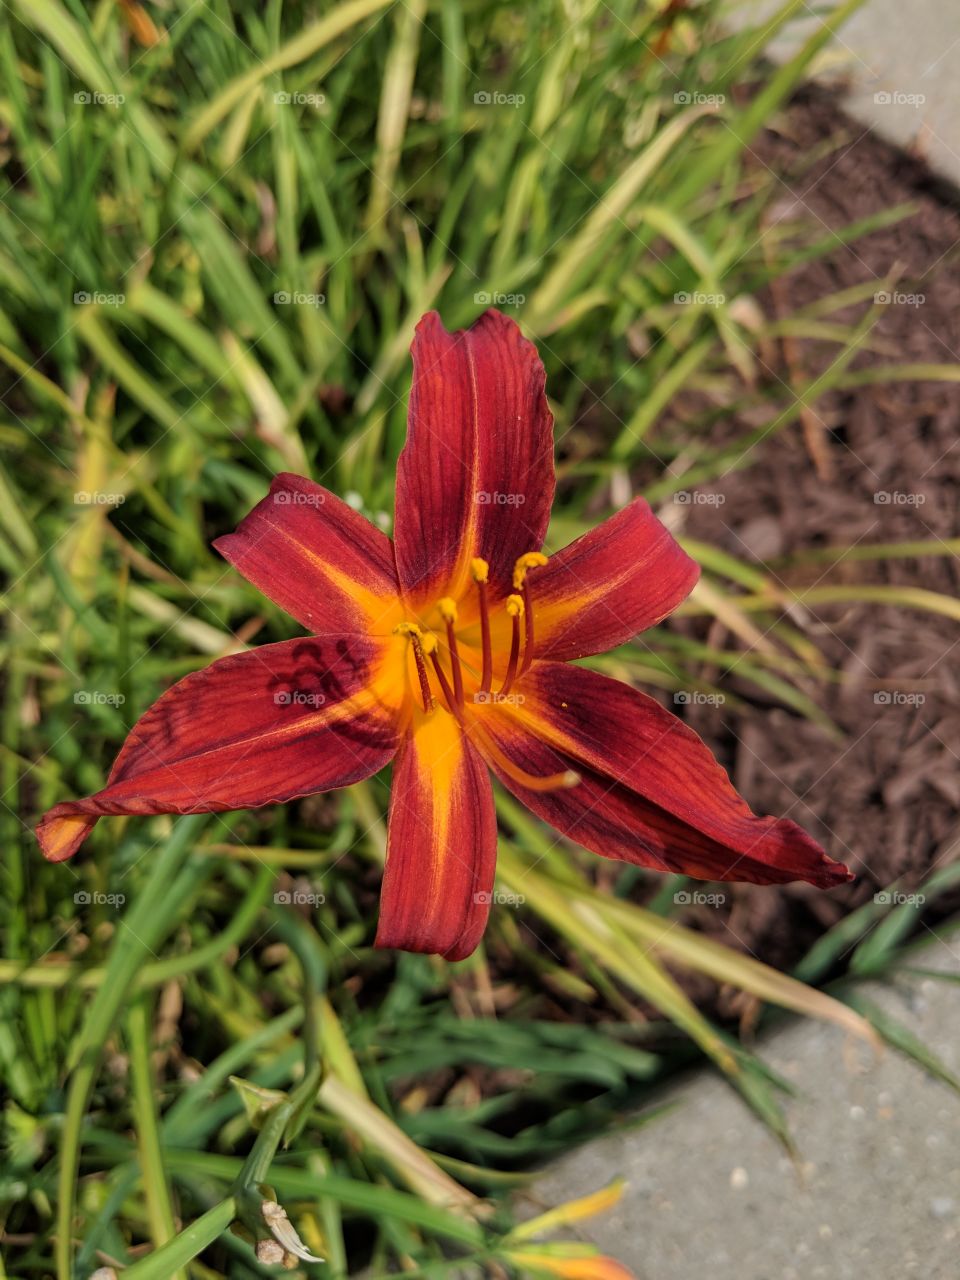 Closeup with the Google Pixel 2XL unedited